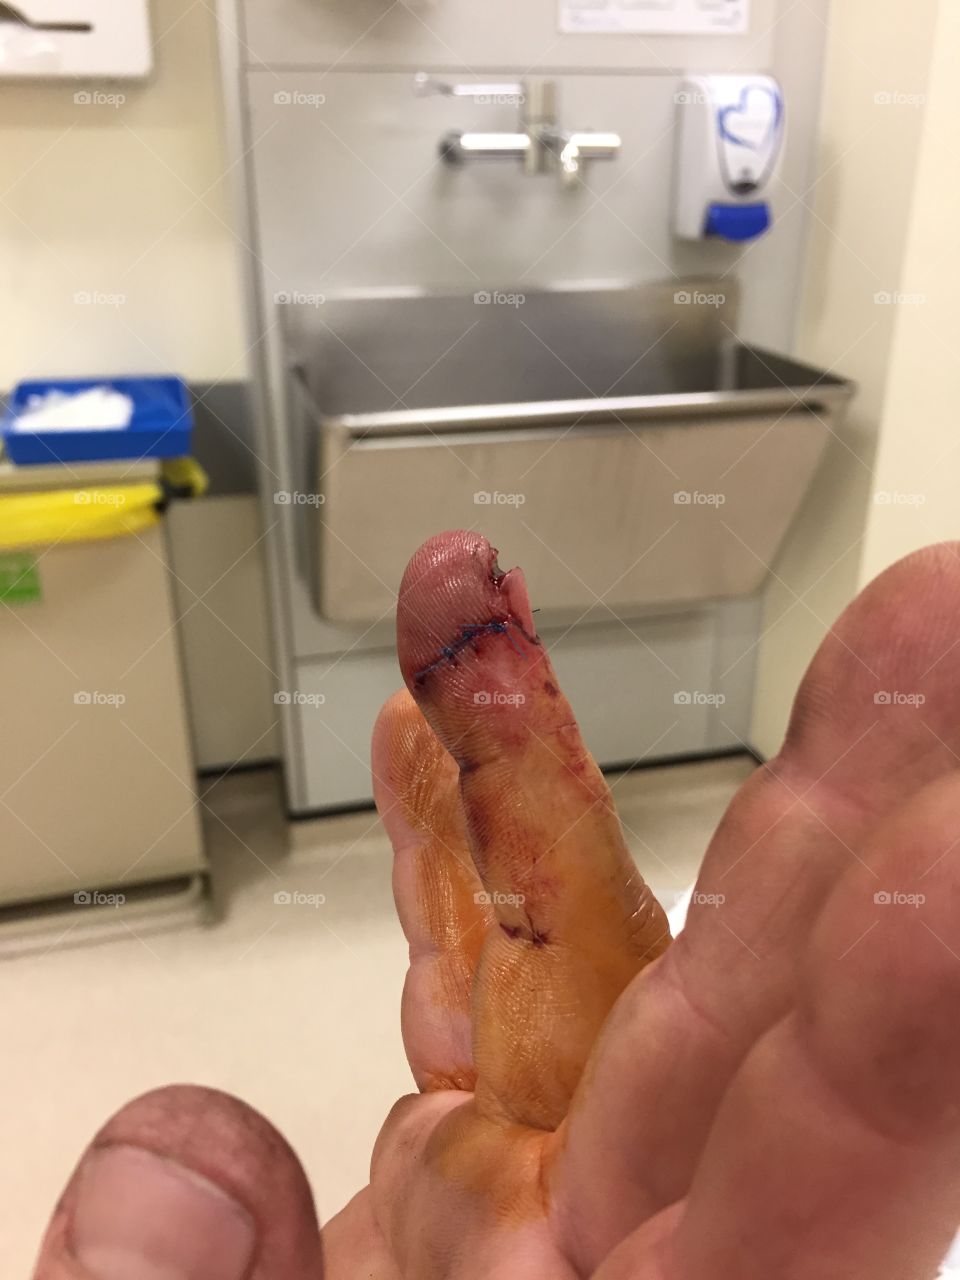 When I amputated the tip of my finger. 